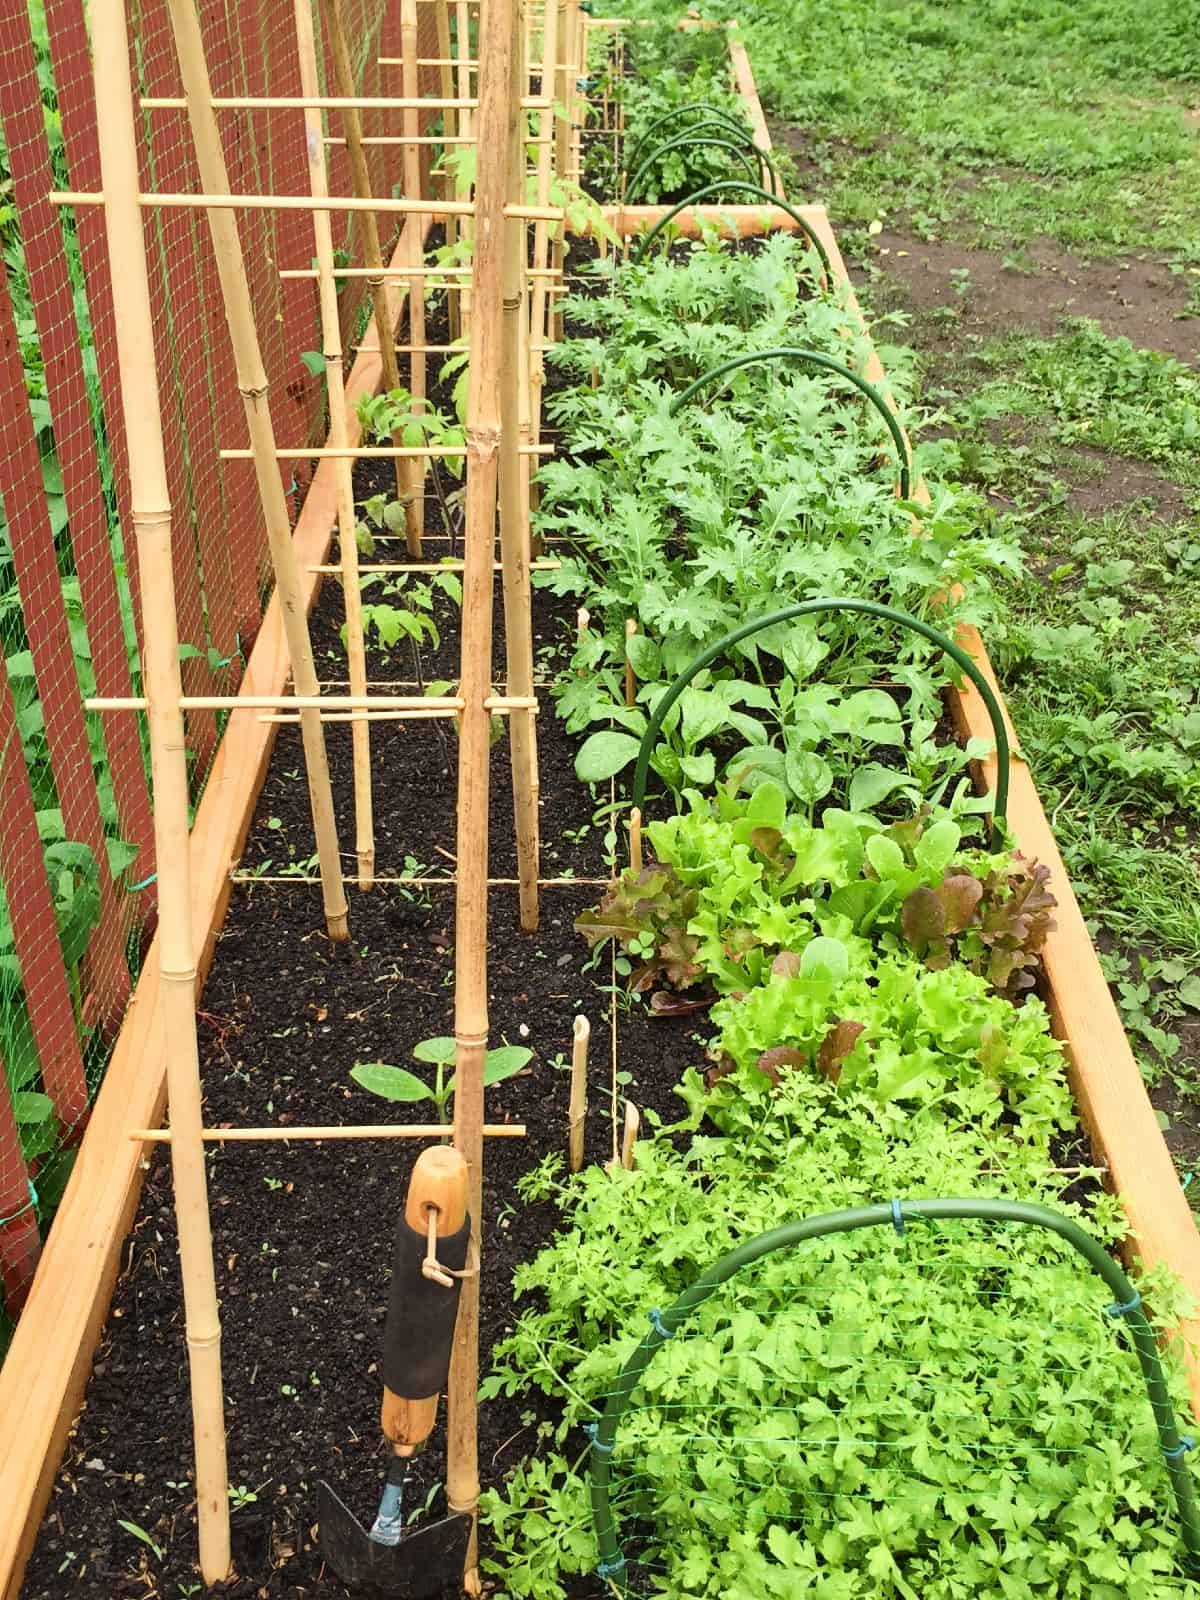 An image of a raised bed in a backyard raised bed garden.